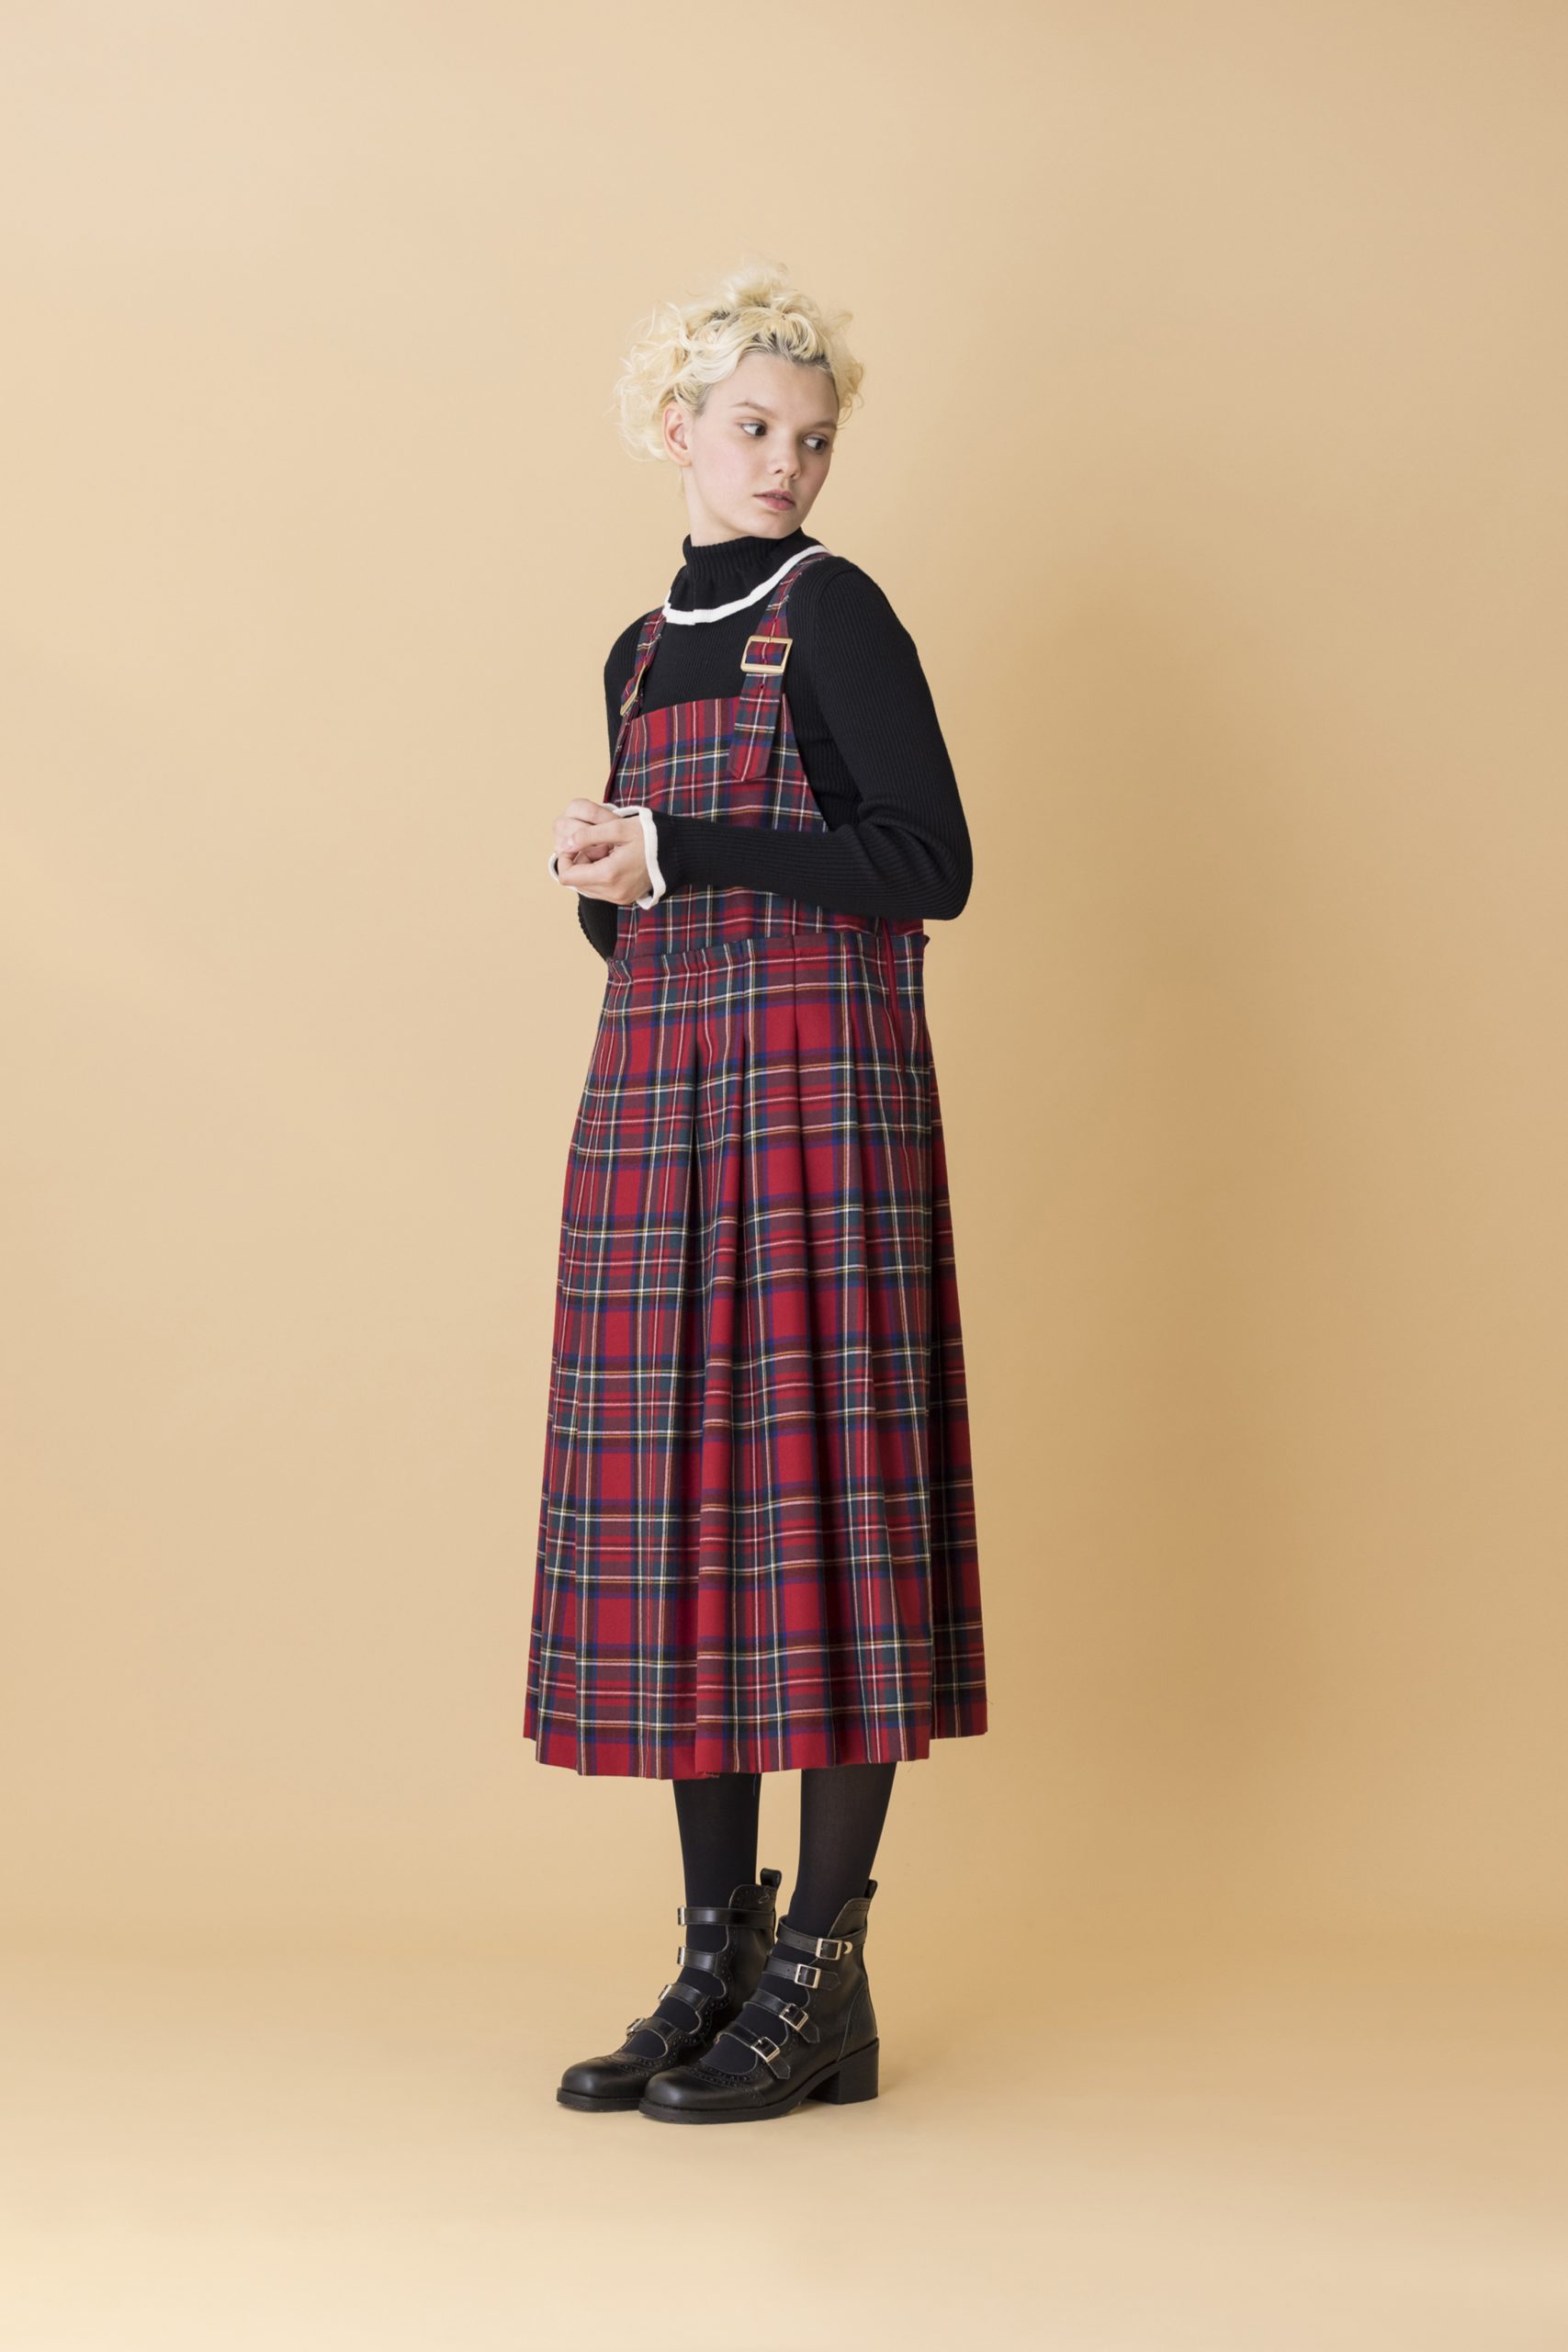 collection 01 | Jane Marple Official Web Site | St.Mary Mead